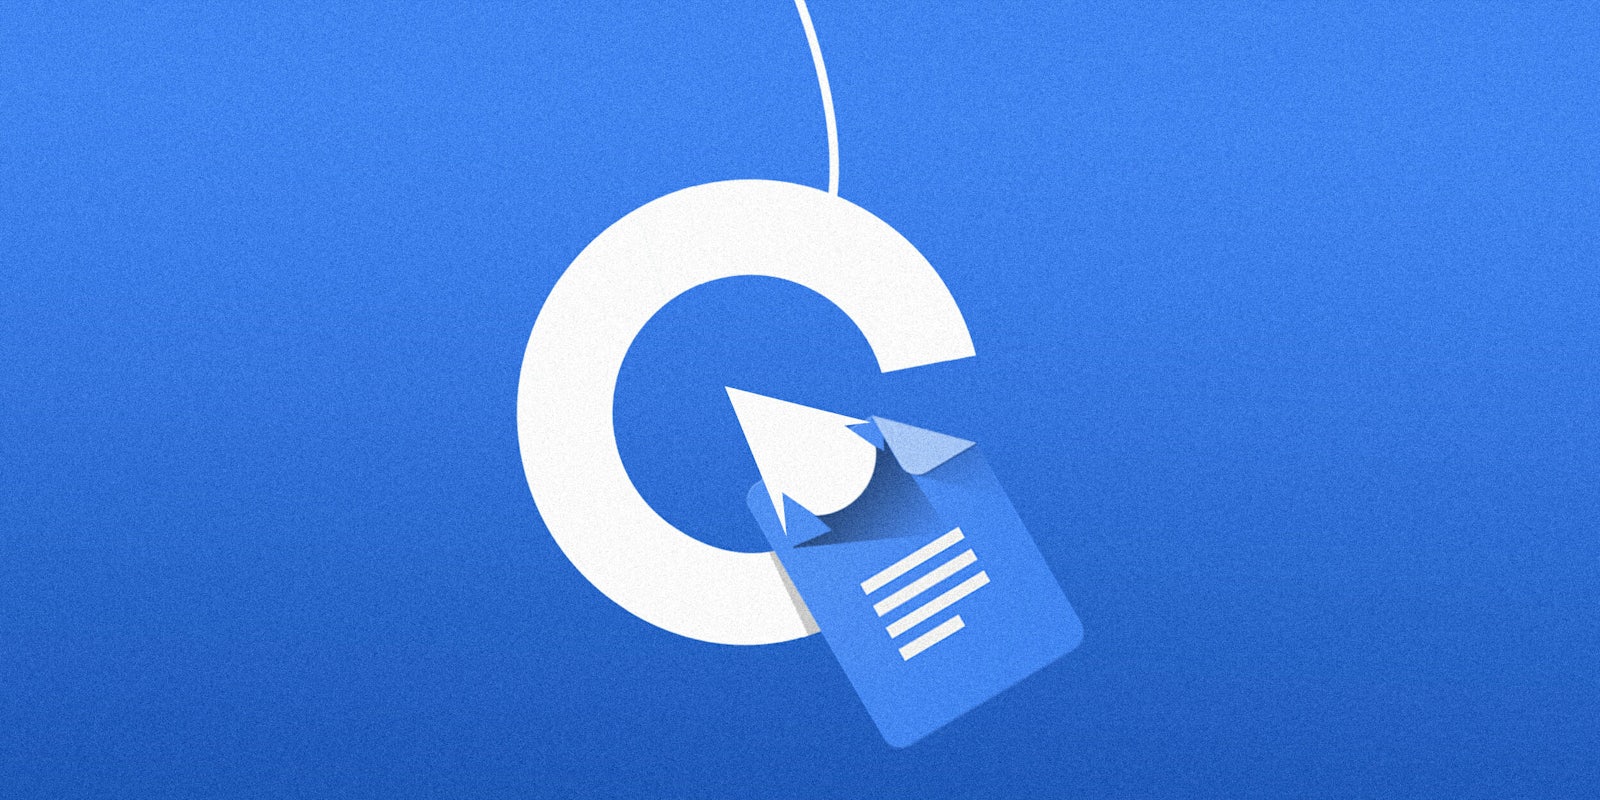 Google logo as a fishing hook with Google doc icon as bait